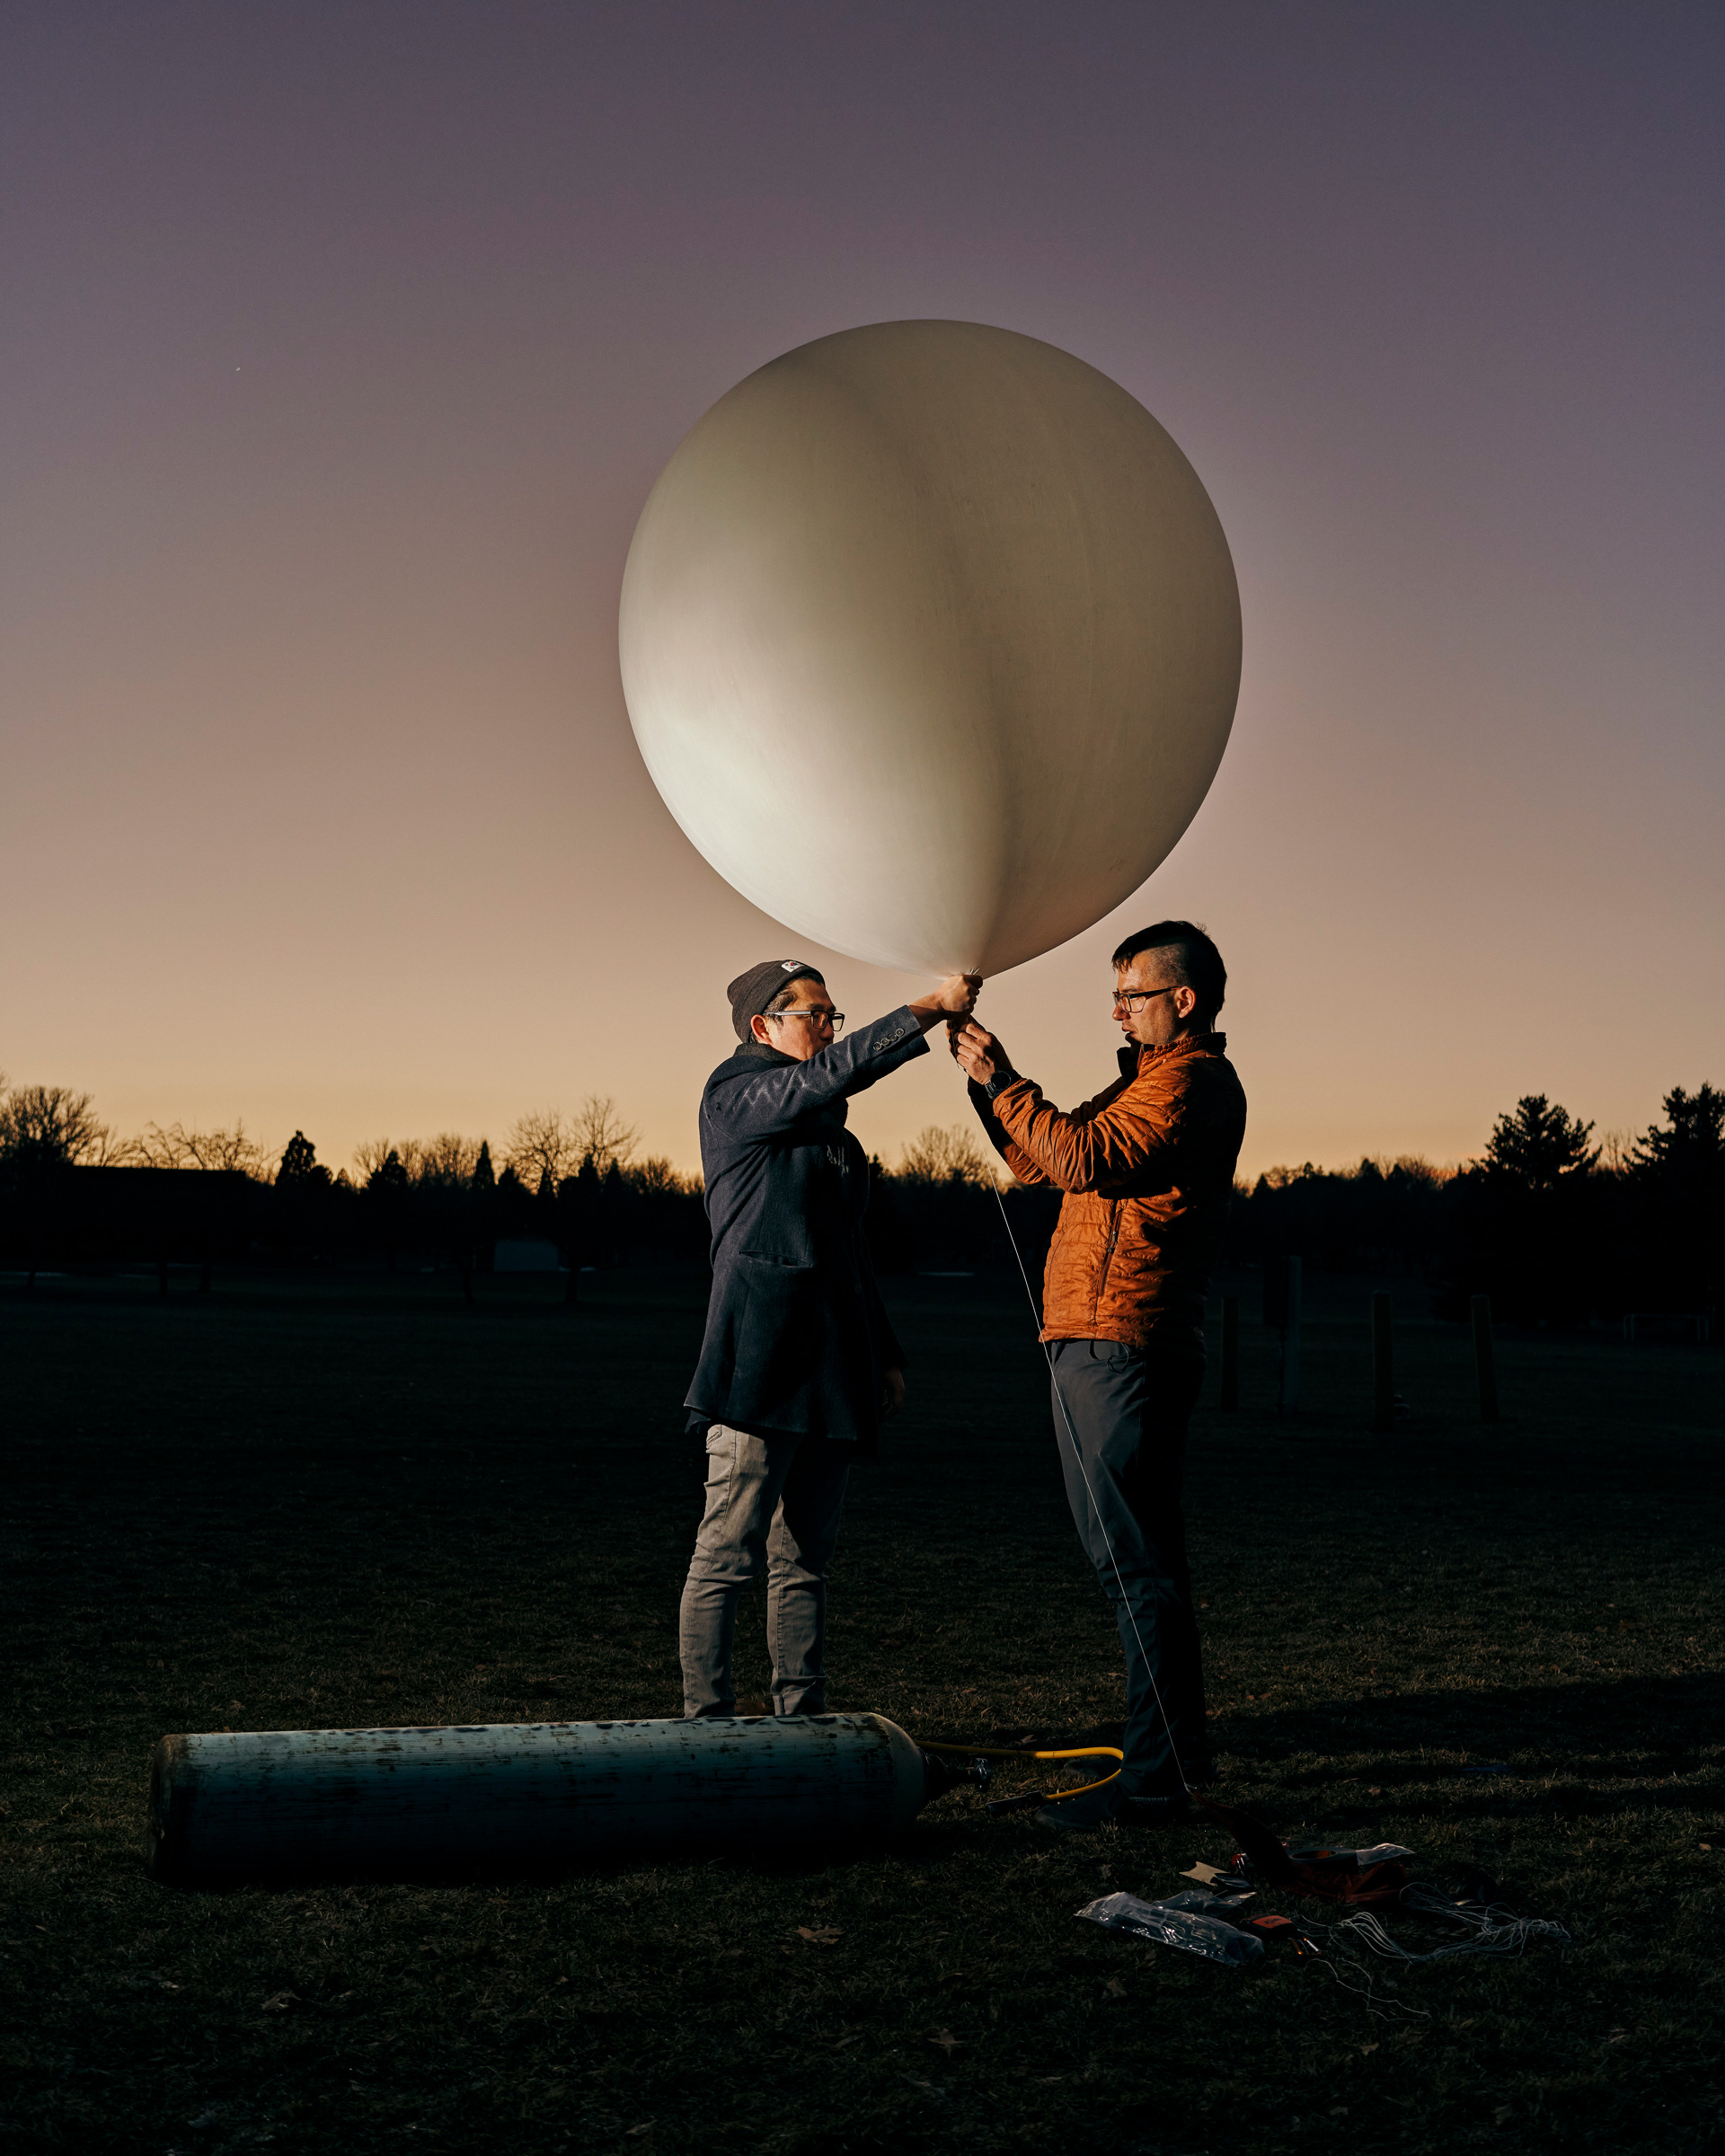 Founder Luke Iseman and co-founder Andrew Song of solar geoengineering startup Make Sunsets hold a weather balloon filled with helium, air and sulfur dioxide at a park in Reno, Nevada, United States on February 12, 2023.